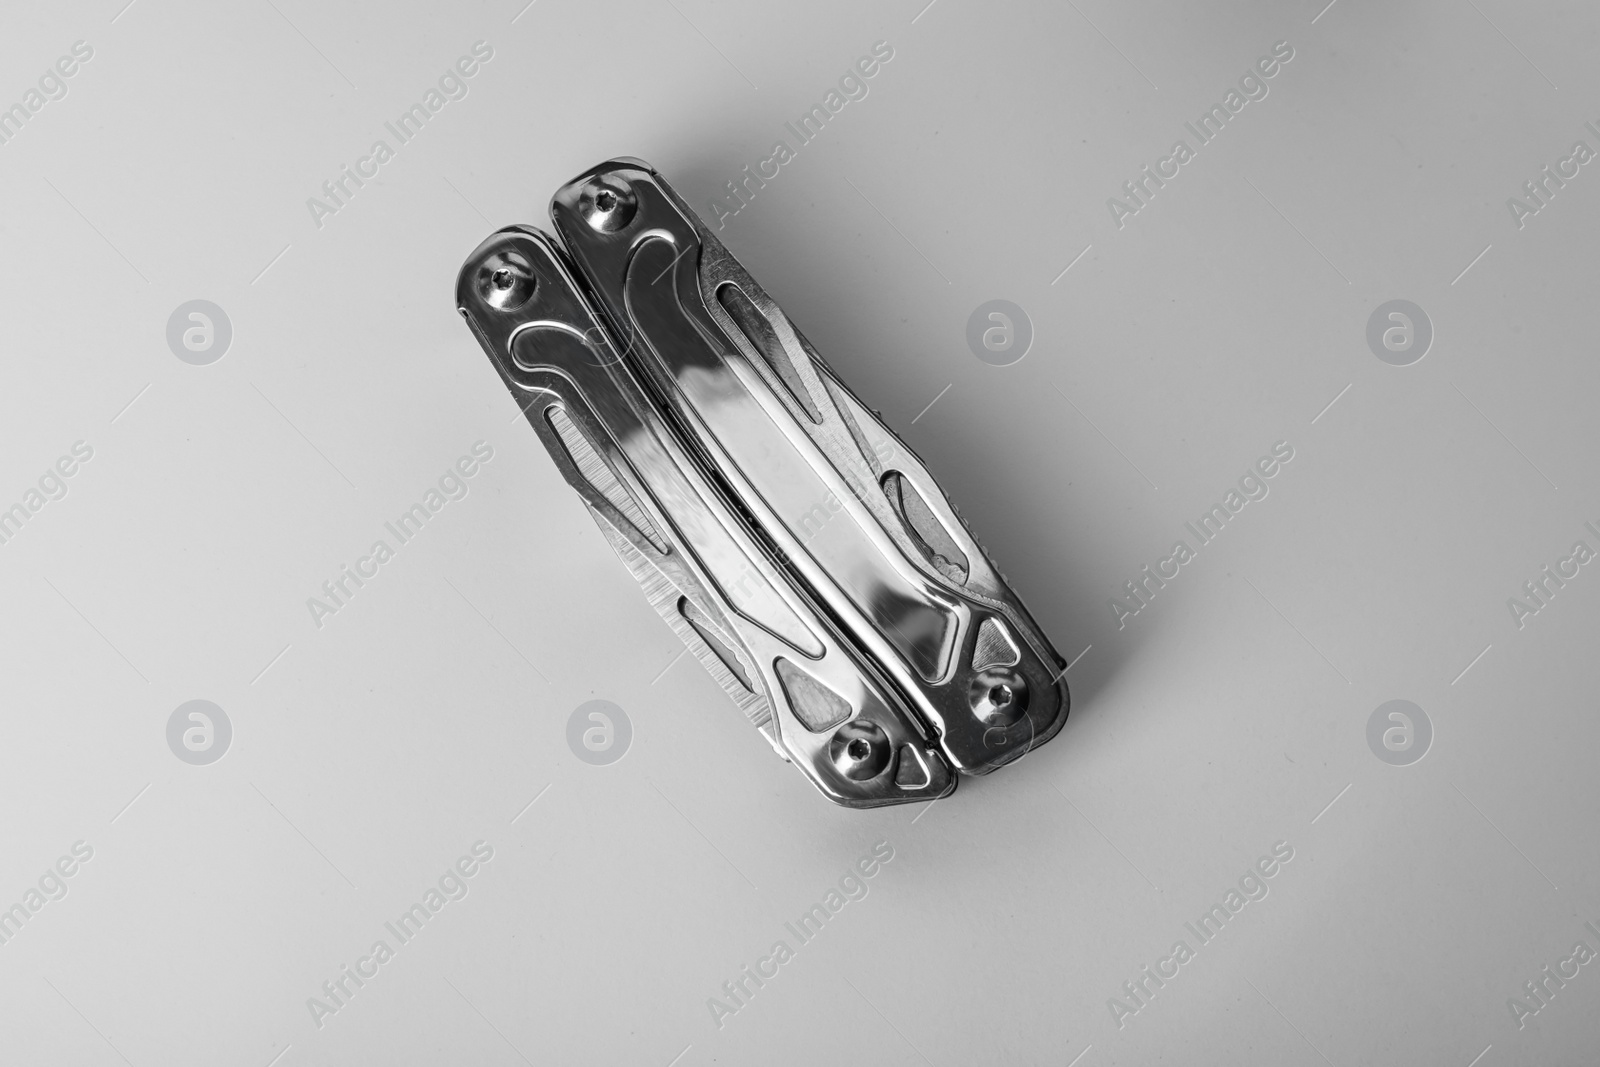 Photo of Compact portable metallic multitool on white background, top view